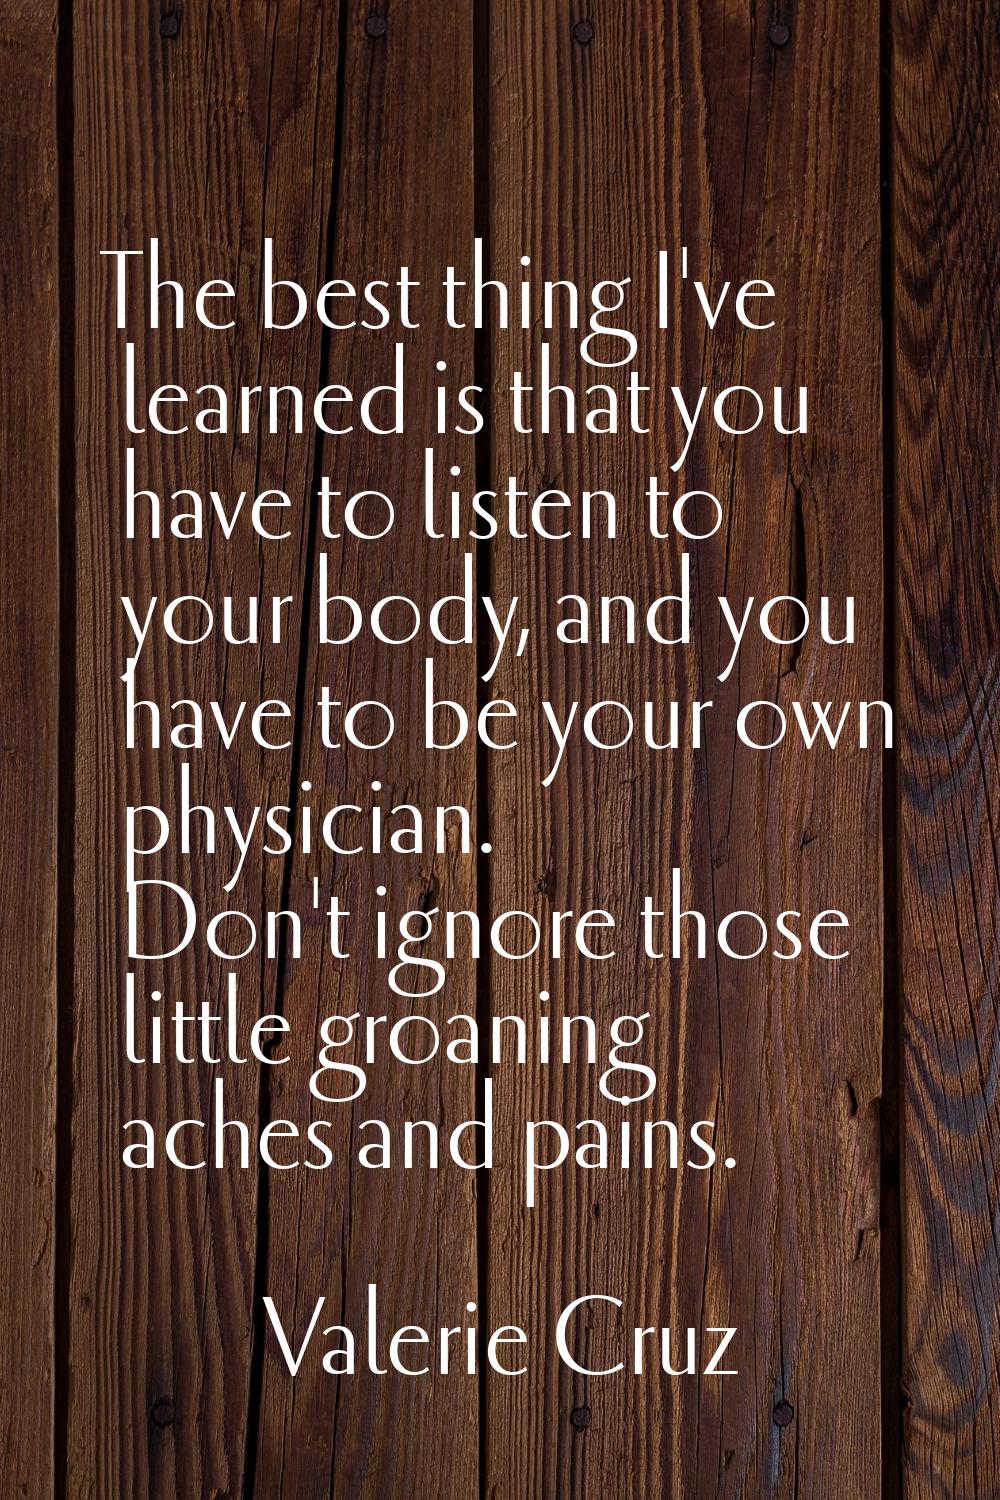 The best thing I've learned is that you have to listen to your body, and you have to be your own ph